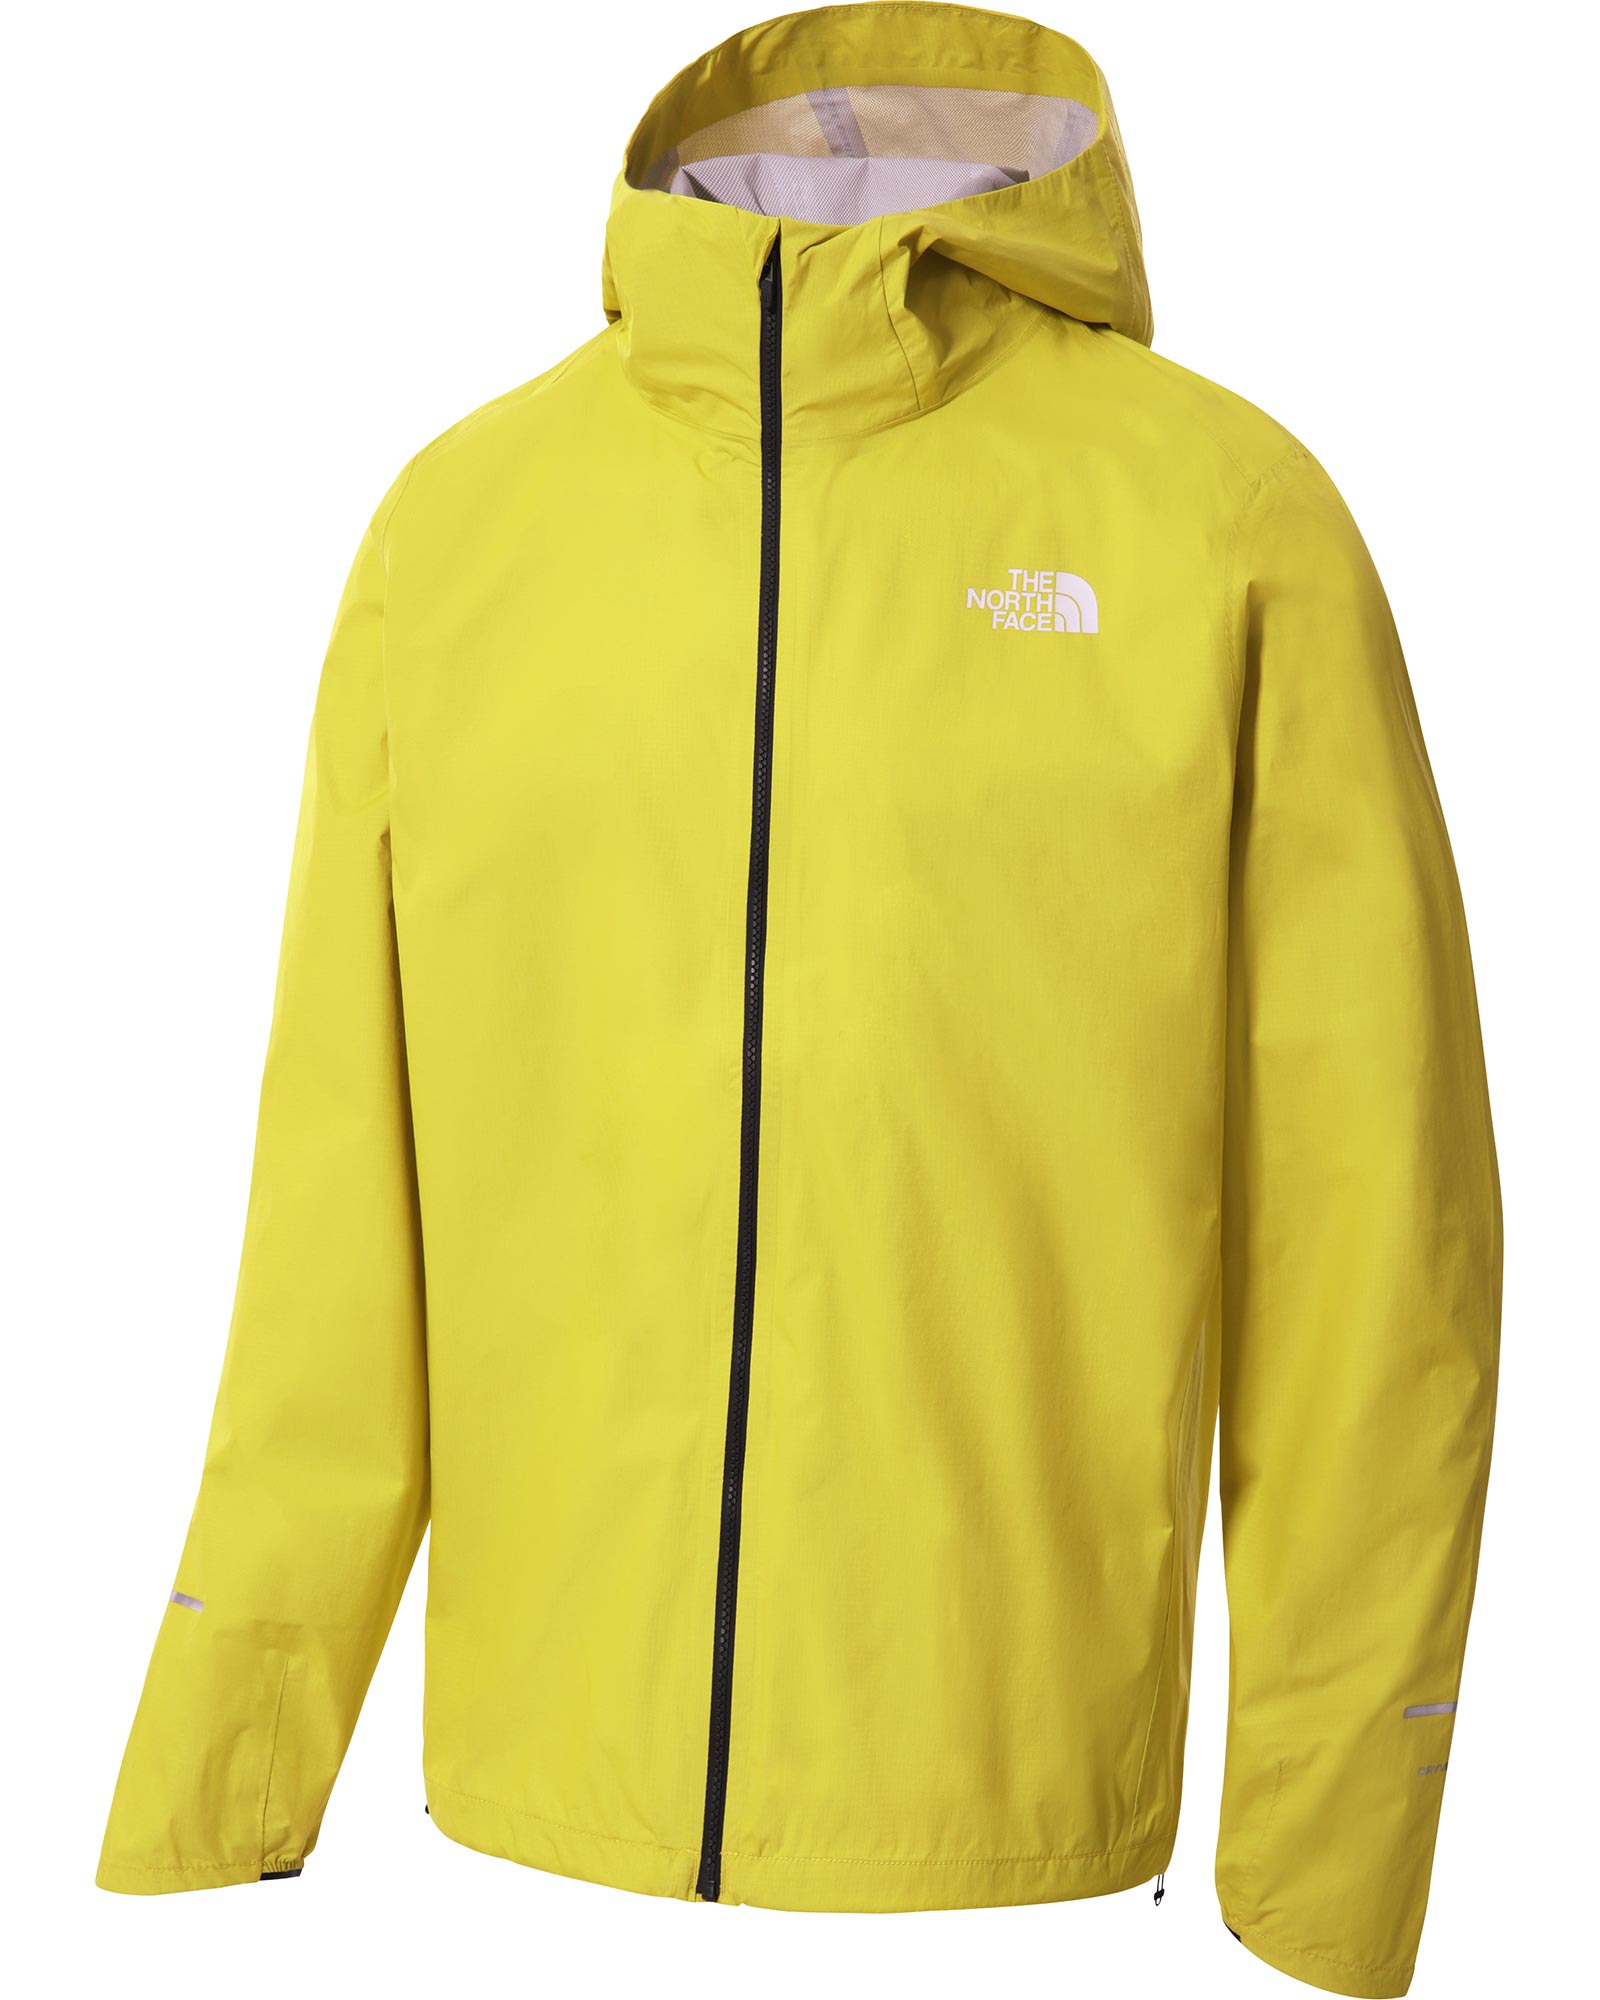 The North Face First Dawn Men’s Packable Jacket - Acid Yellow XL